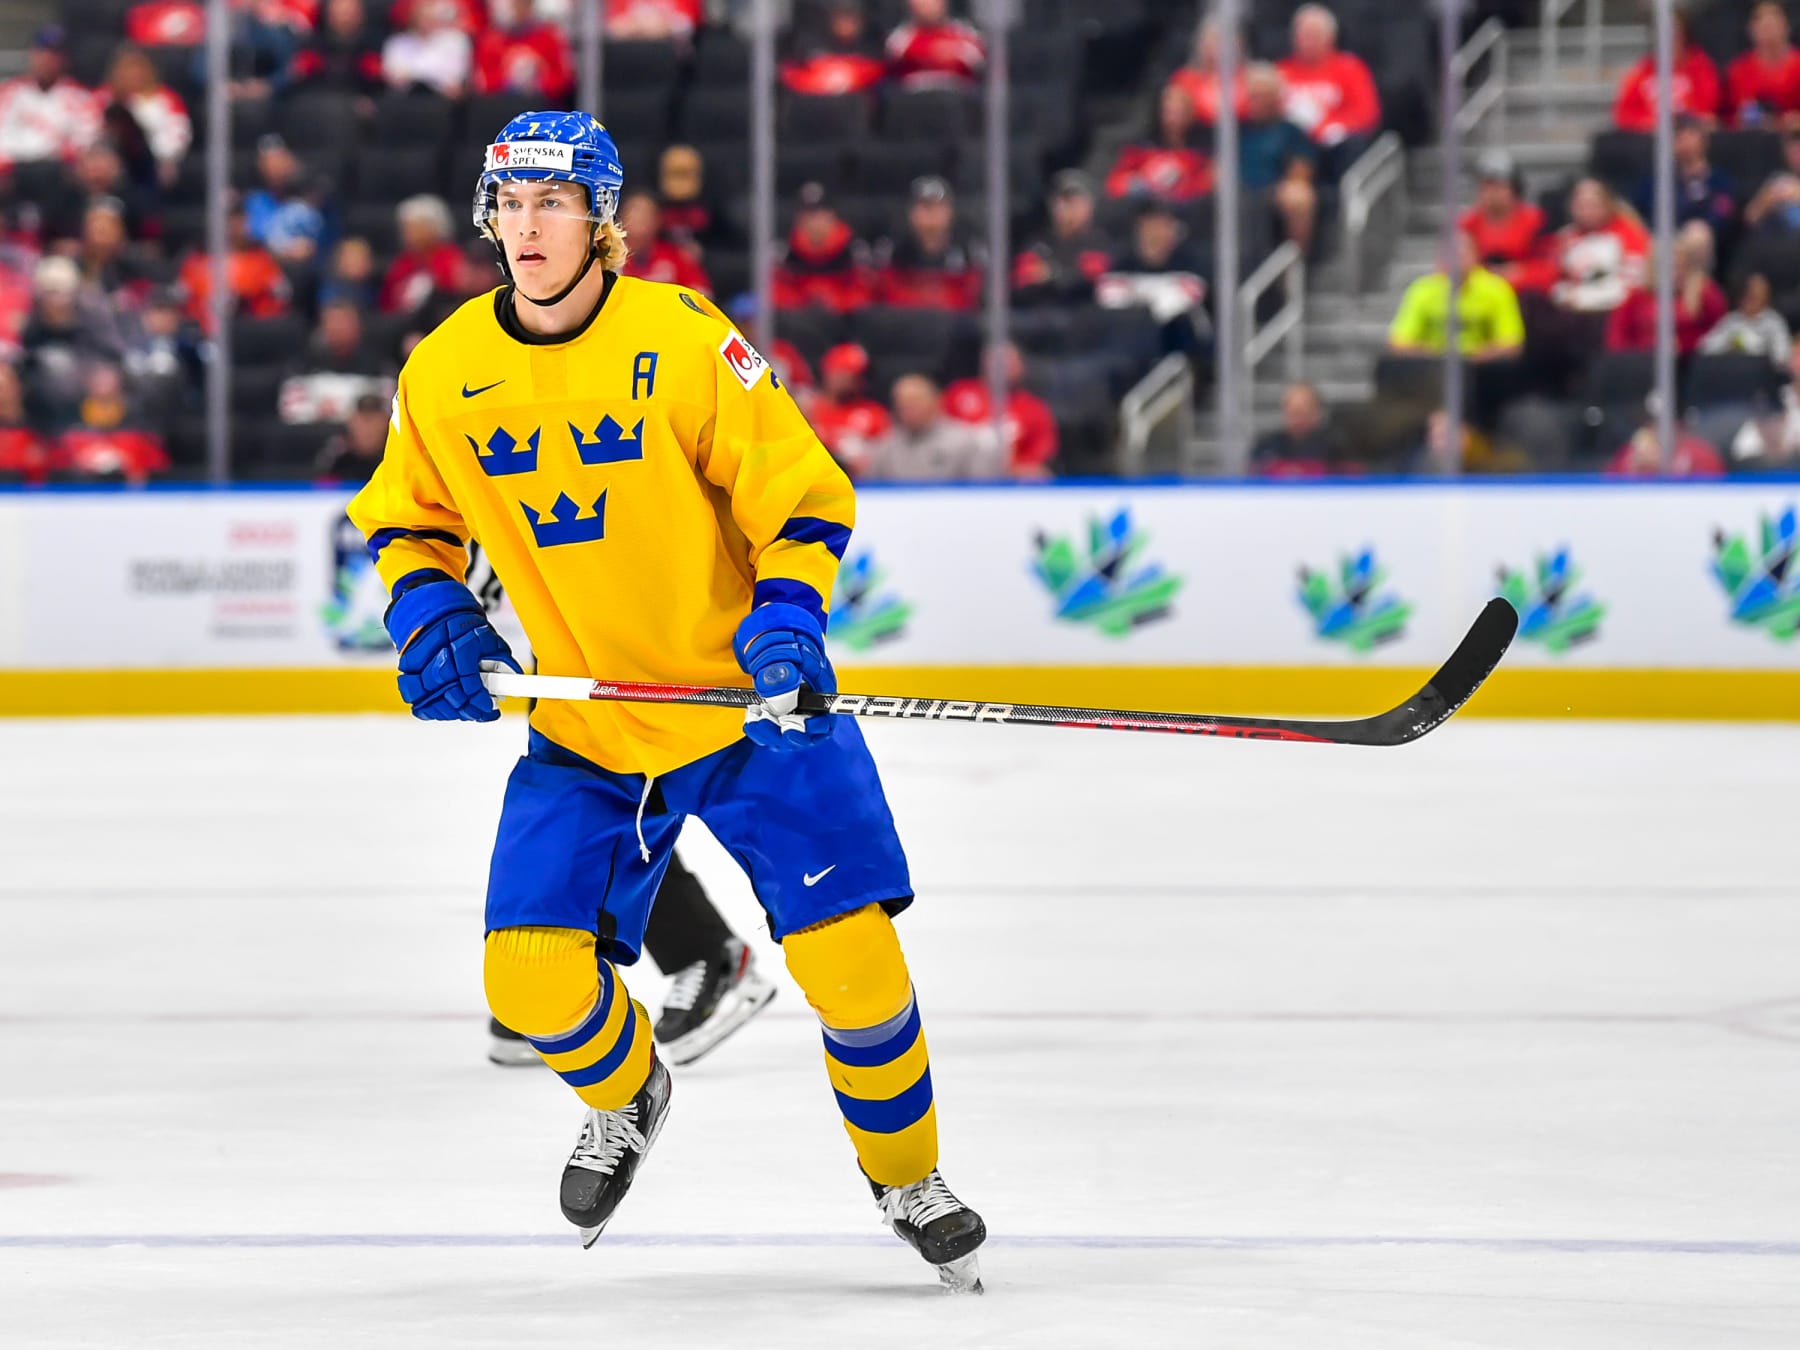 University cities in Sweden and their ice hockey teams